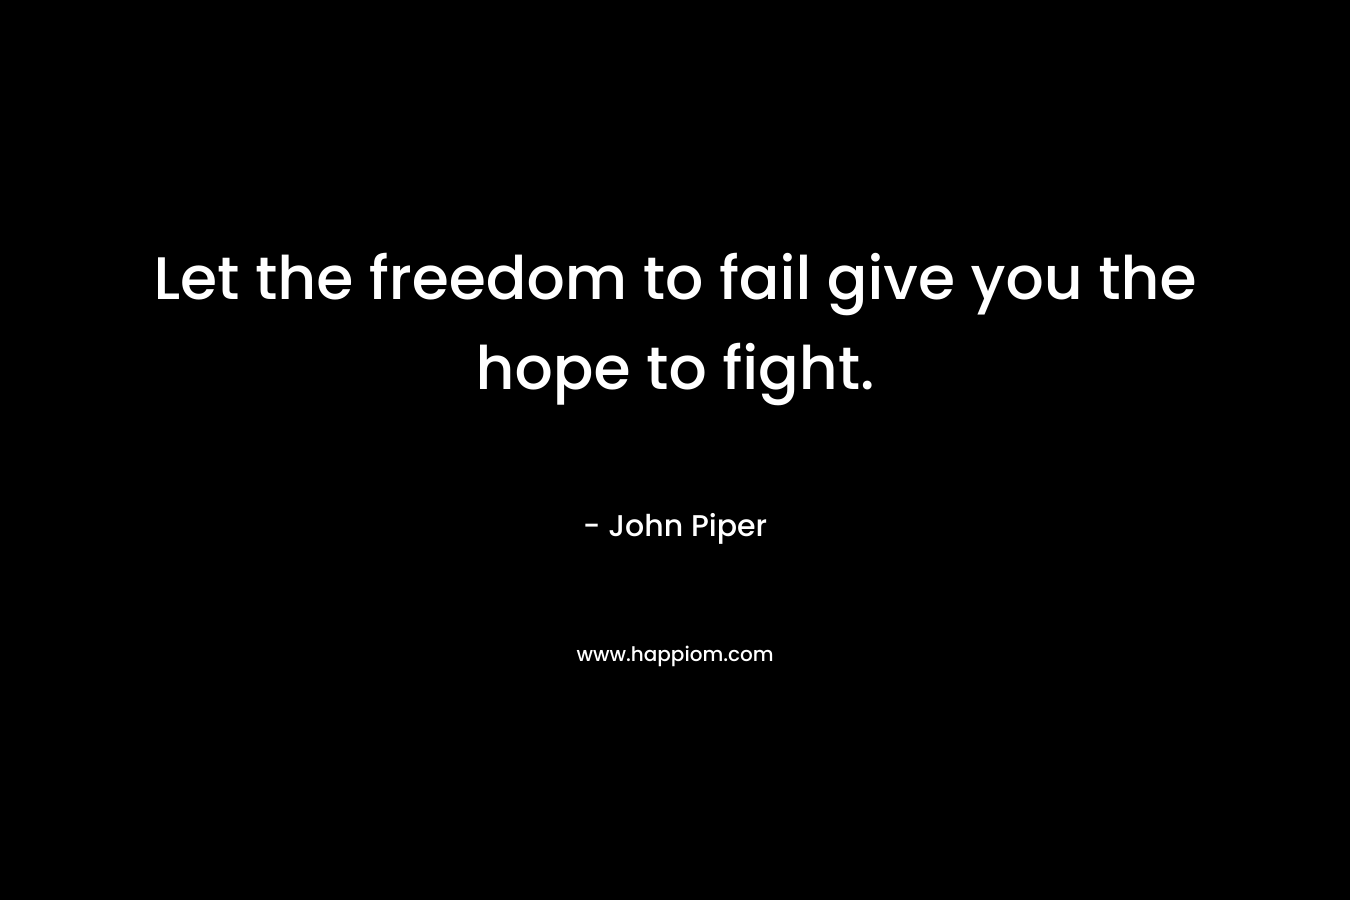 Let the freedom to fail give you the hope to fight.